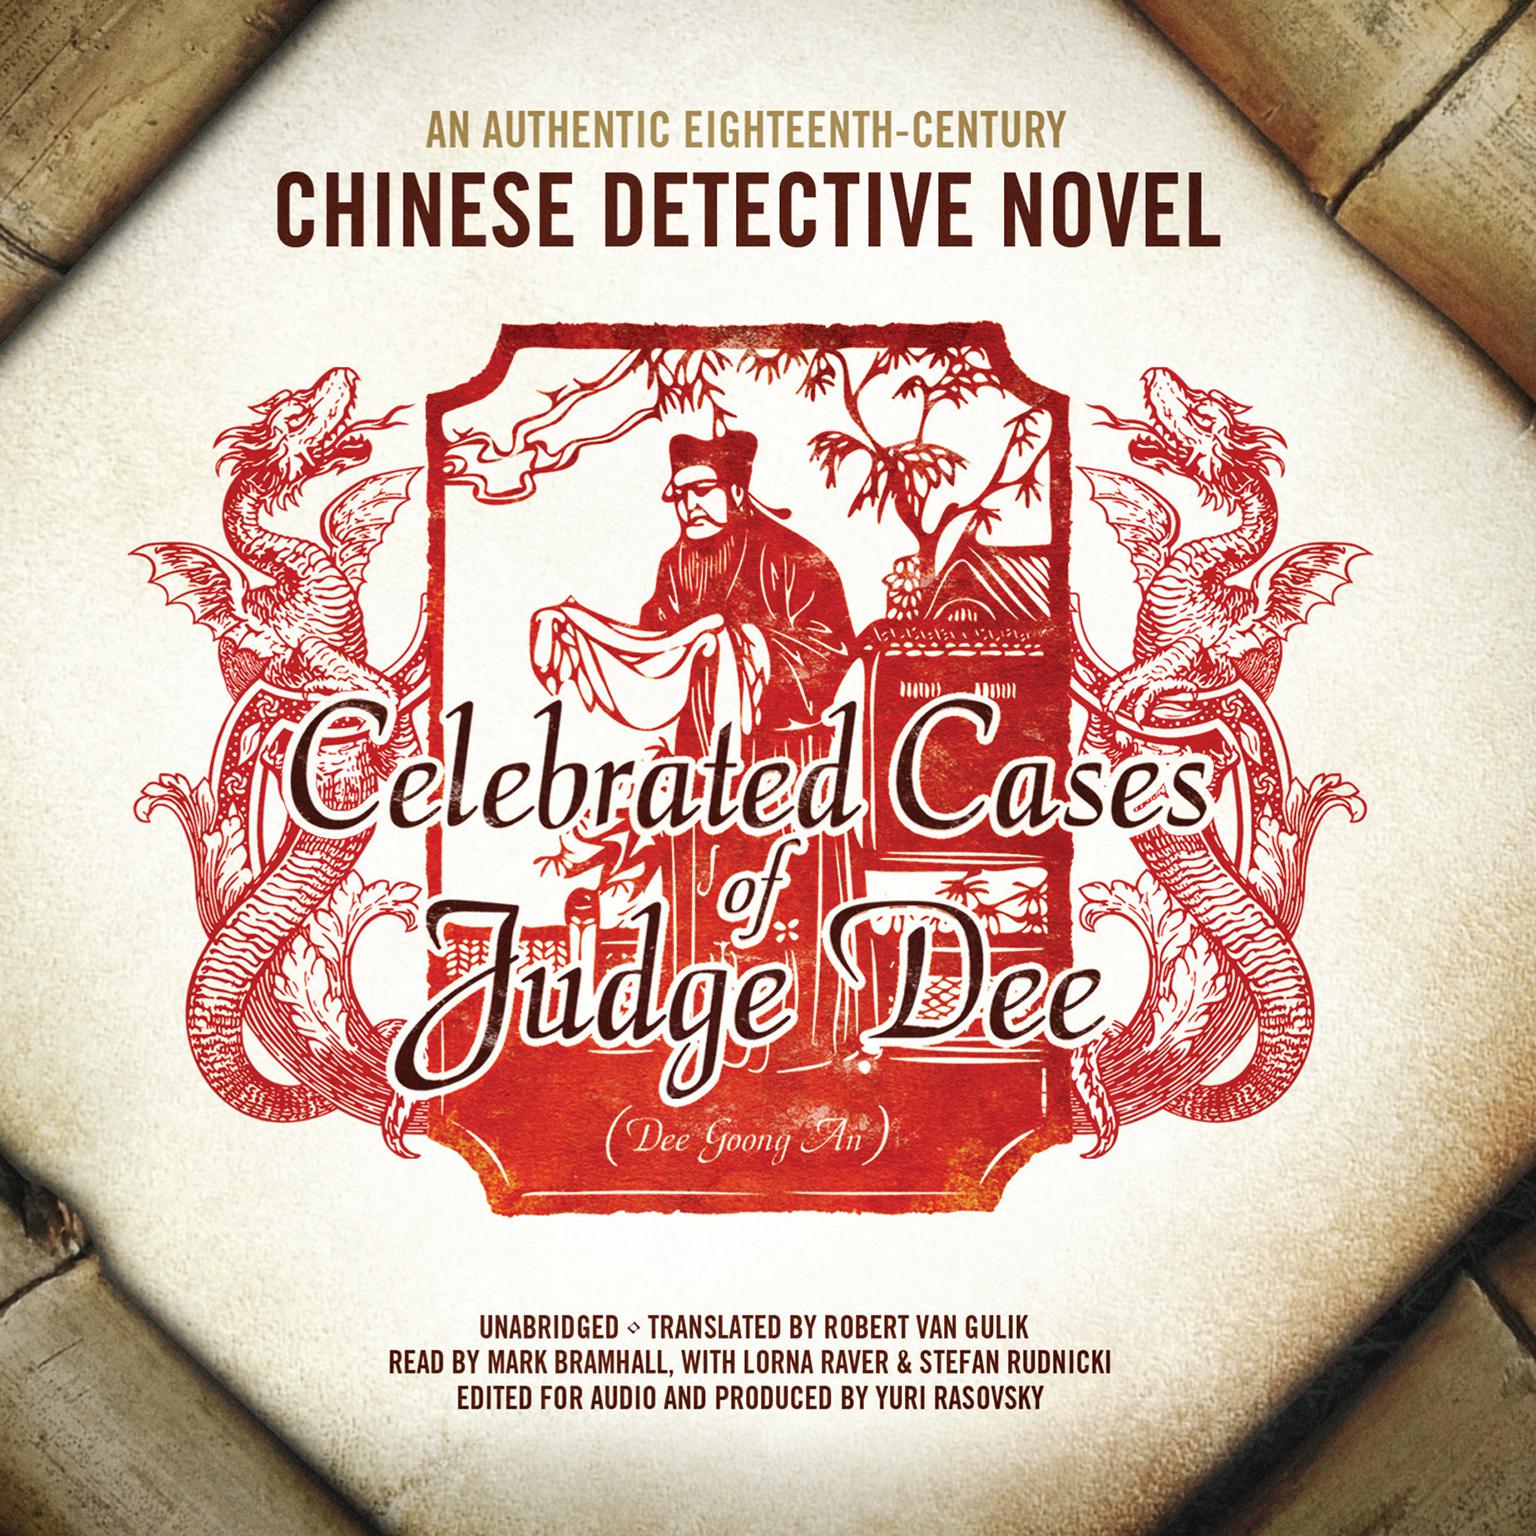 Celebrated Cases of Judge Dee (Dee Goong An): An Authentic Eighteenth-Century Chinese Detective Novel Audiobook, by Yuri Rasovsky